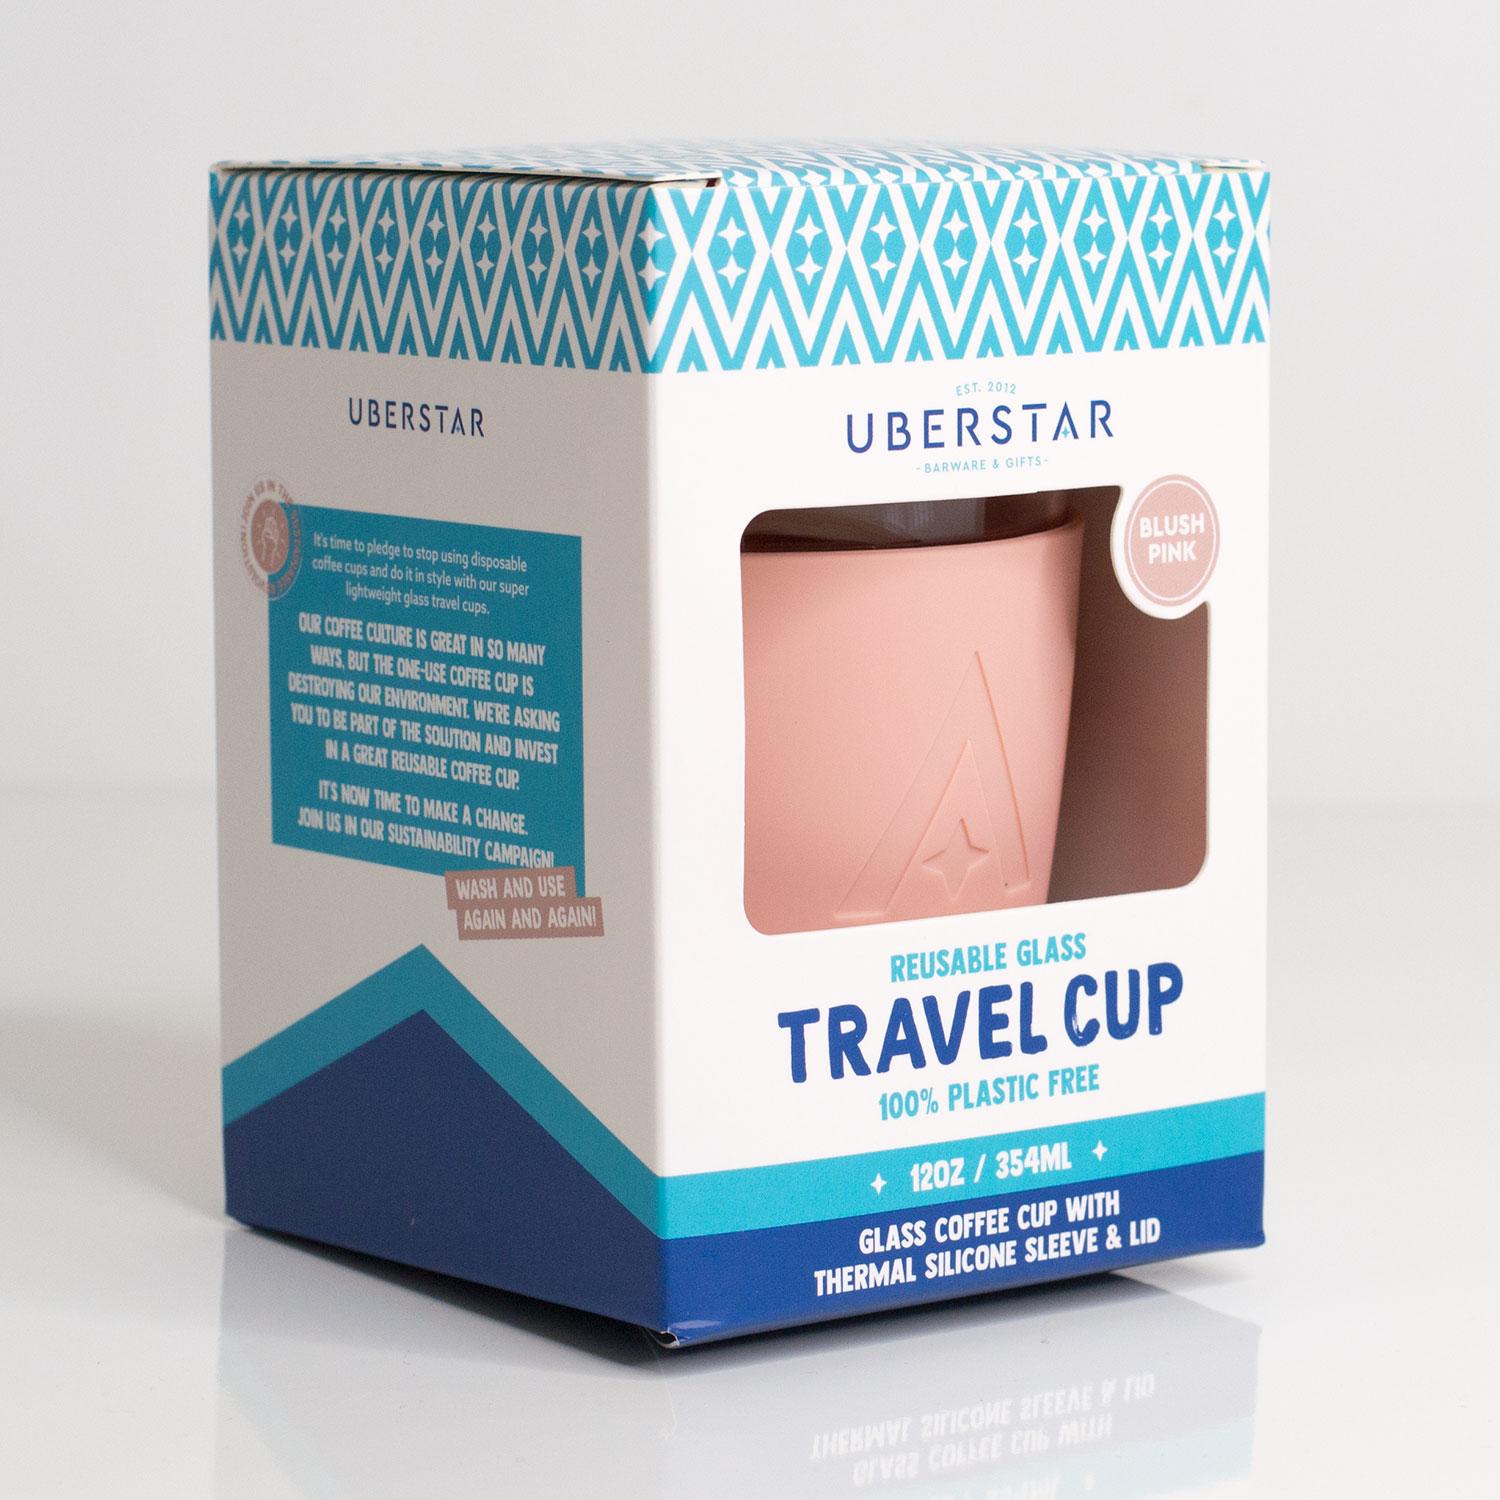 Uberstar Reusable Glass Travel Cup - Blush Pink - Only £14.99